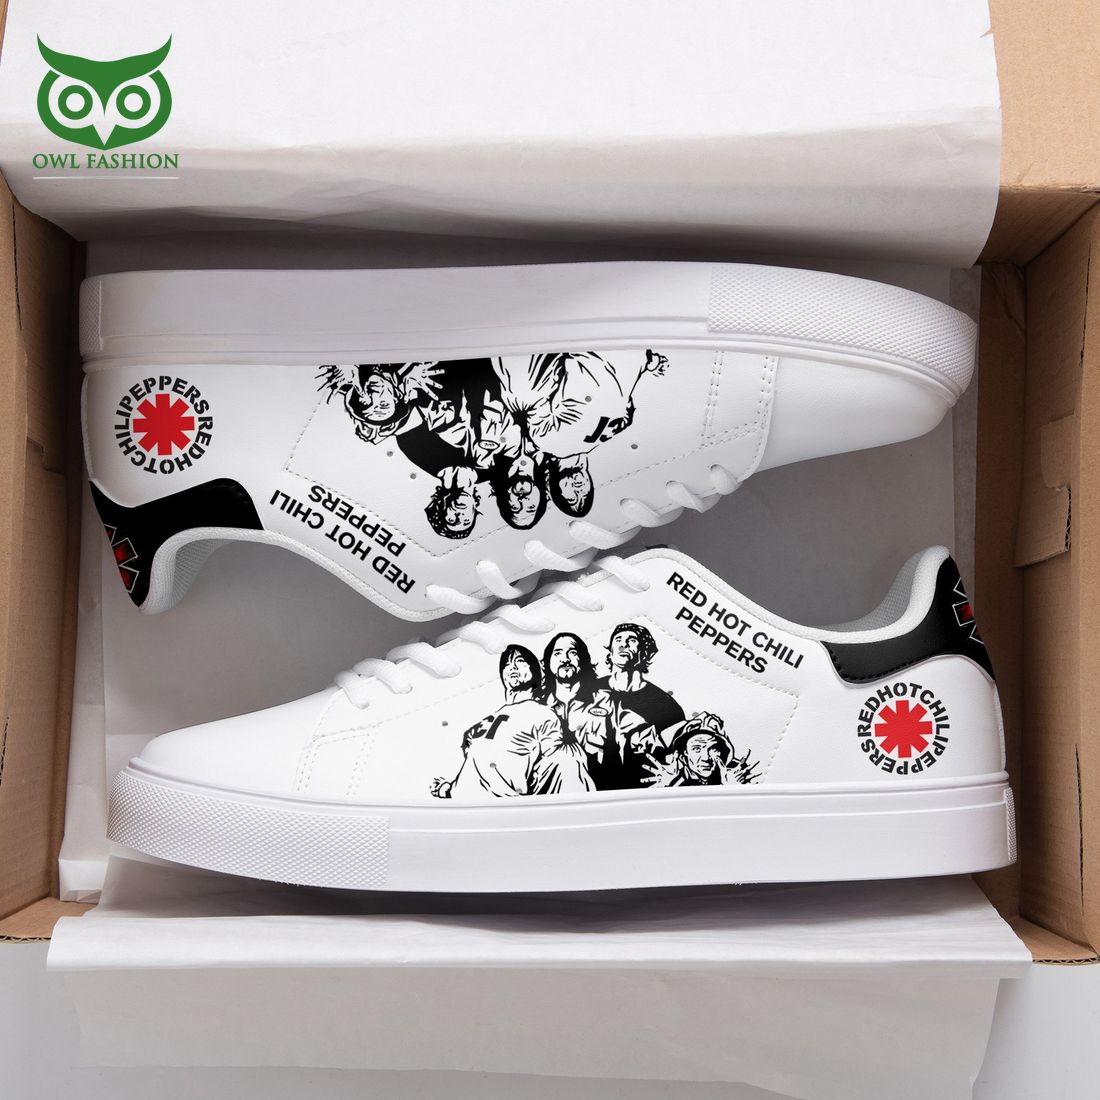 red hot chili peppers drawing stan smith shoes 1 9tUwX